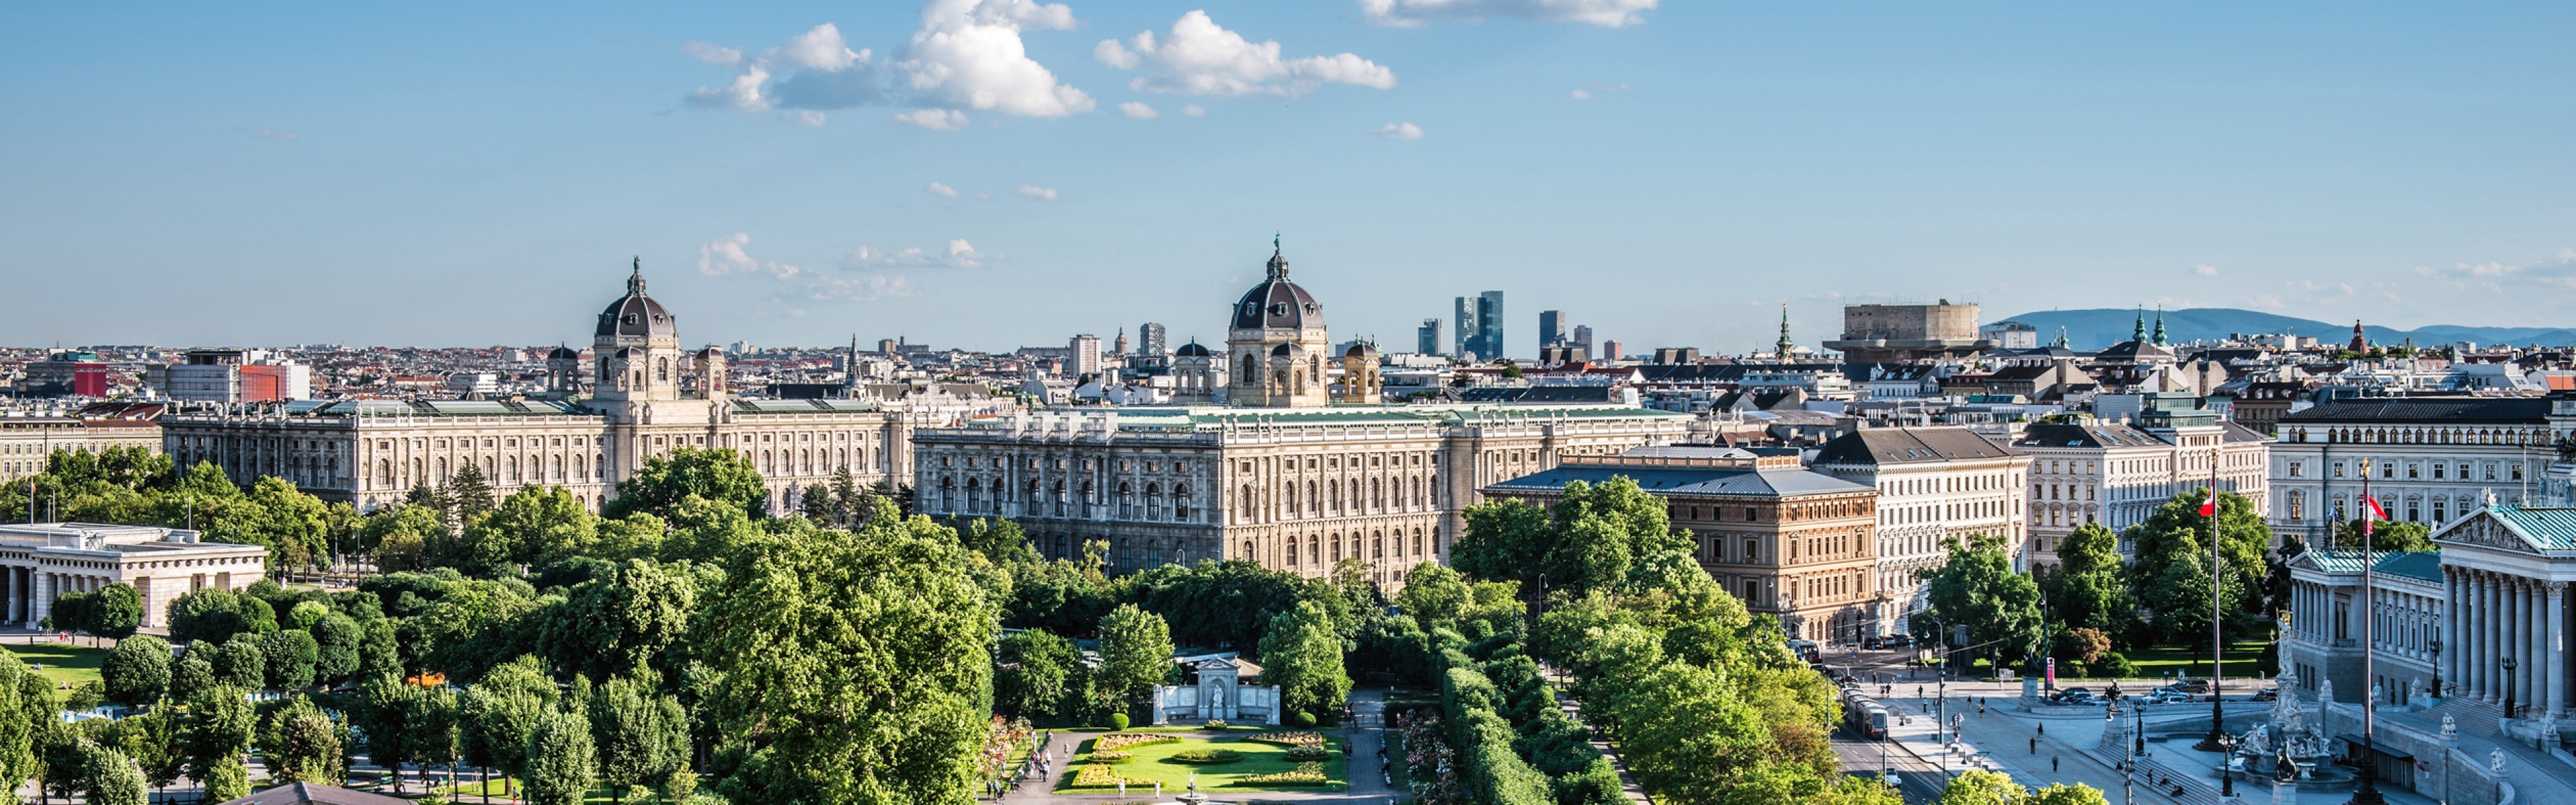 3840x1200  Wallpaper vienna, austria, capital, travel, view from above